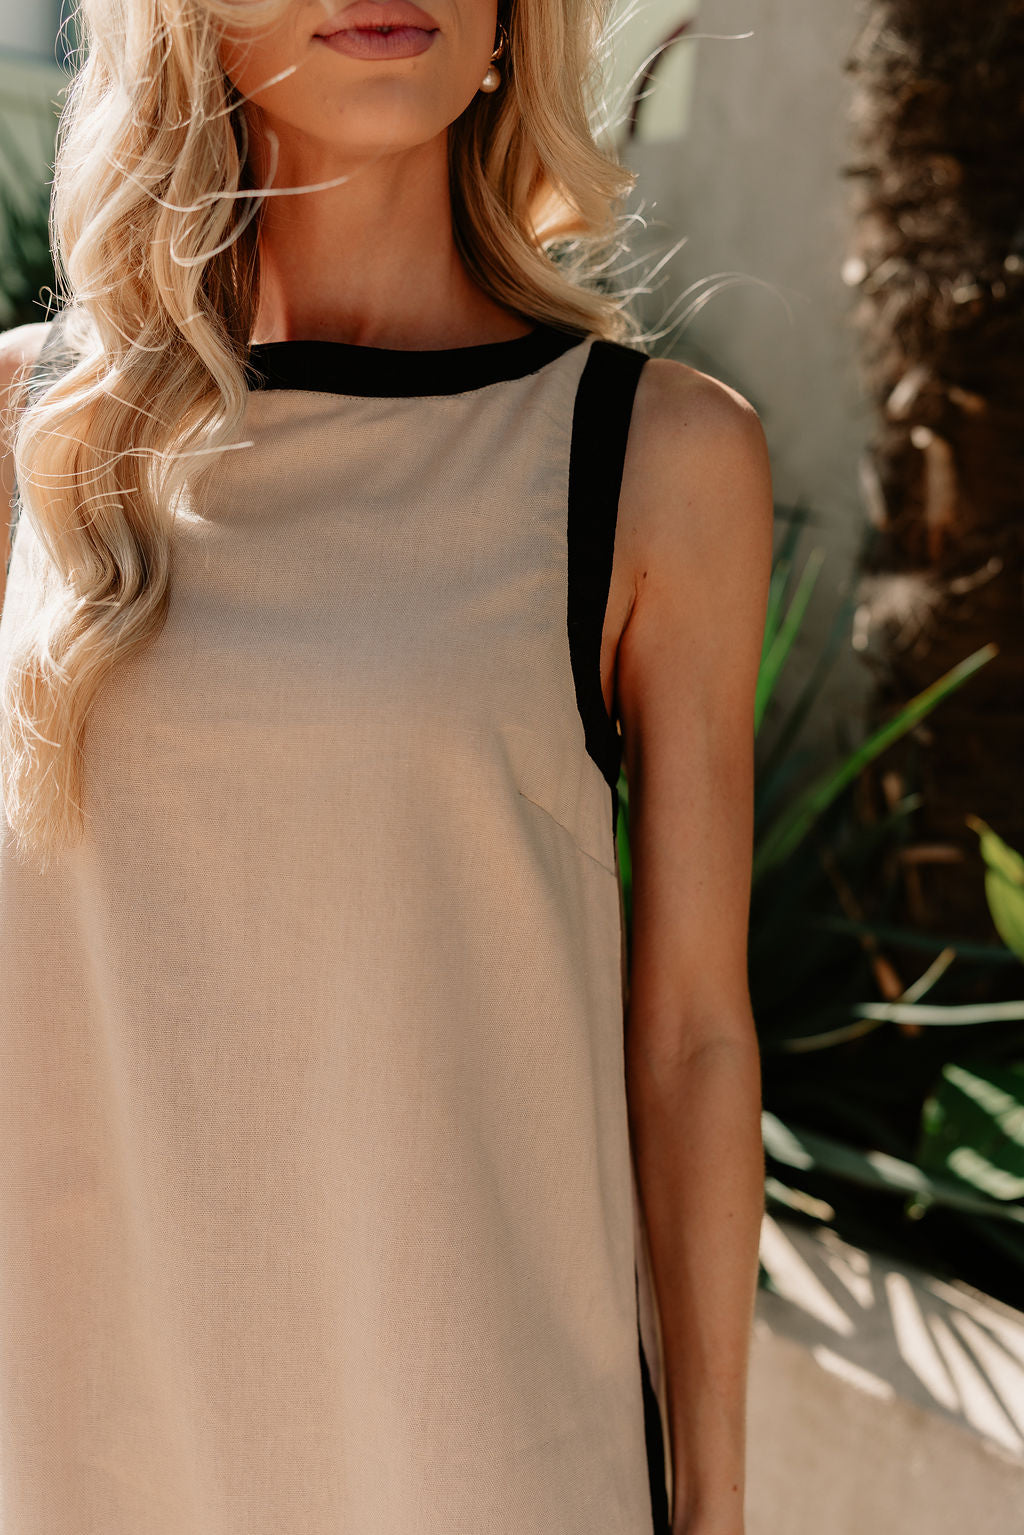 close up view of female model wearing the Camila Oatmeal & Black Sleeveless Mini Dress which features Tan Linen Fabric, Black Trim Details,Tan Lining, Mini Length, Round Neckline, Sleeveless and Monochrome Back Zipper with Hook Closure